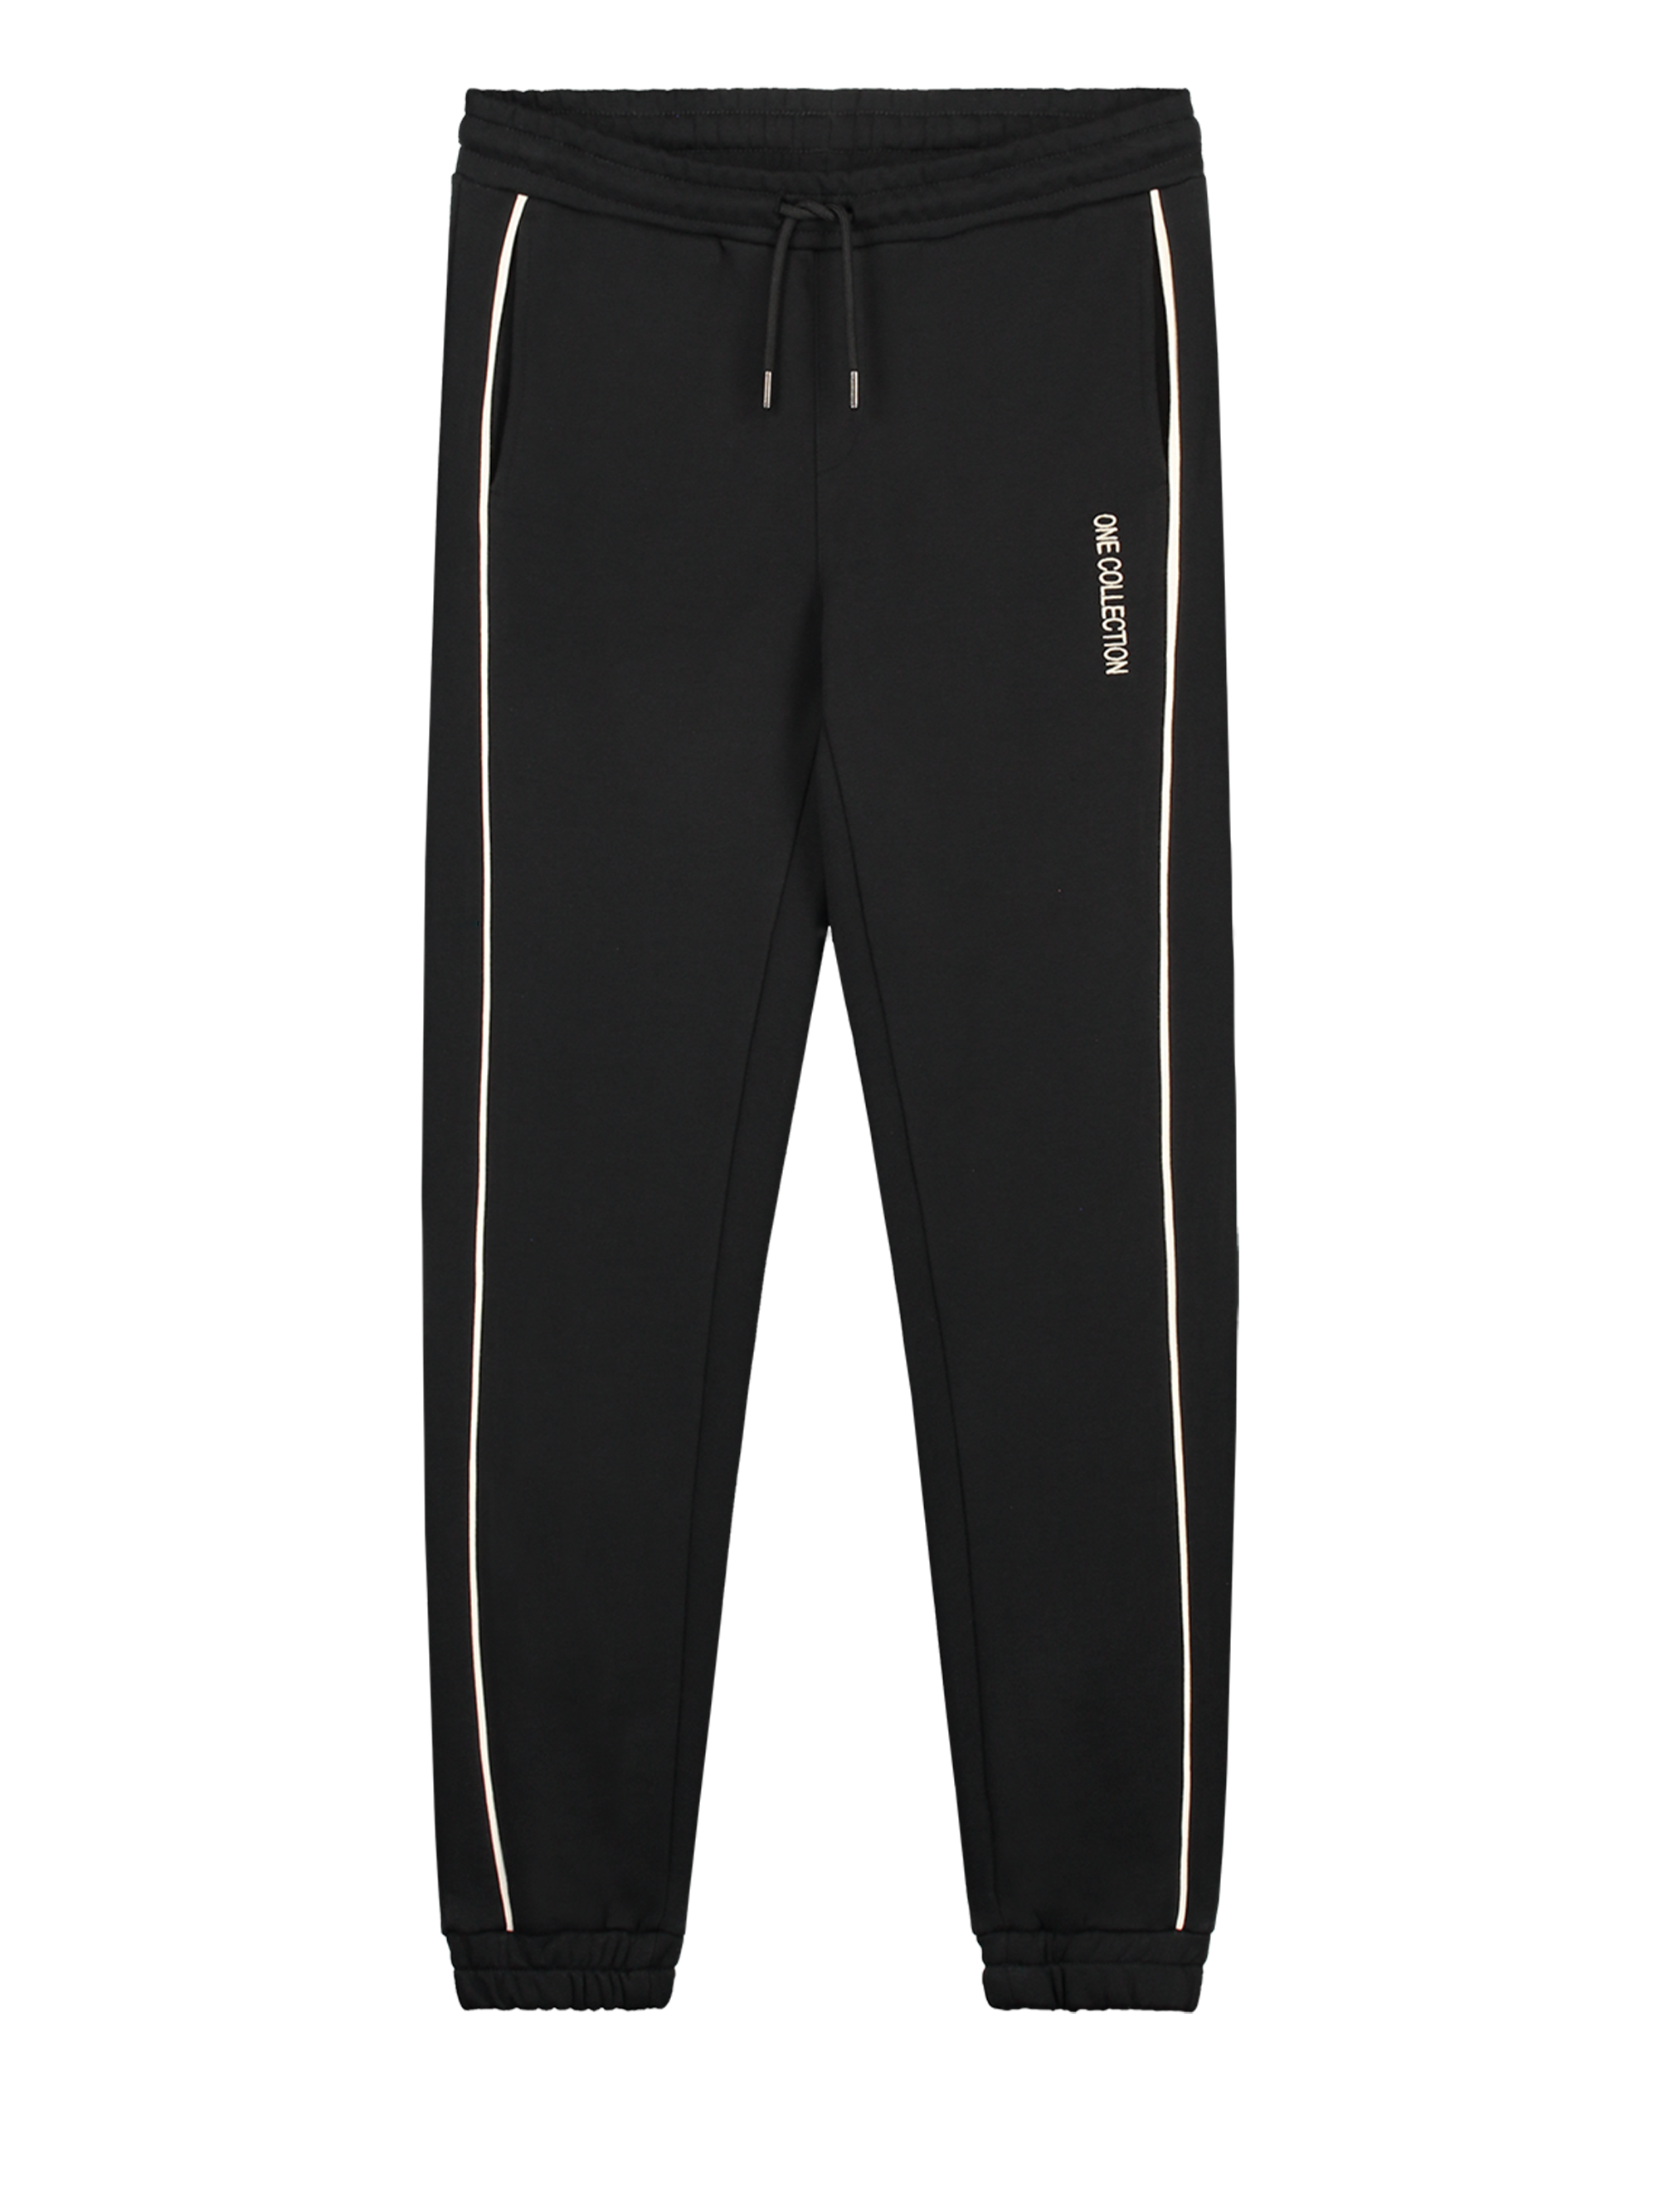 ONE collection Loose fit sweatpants  